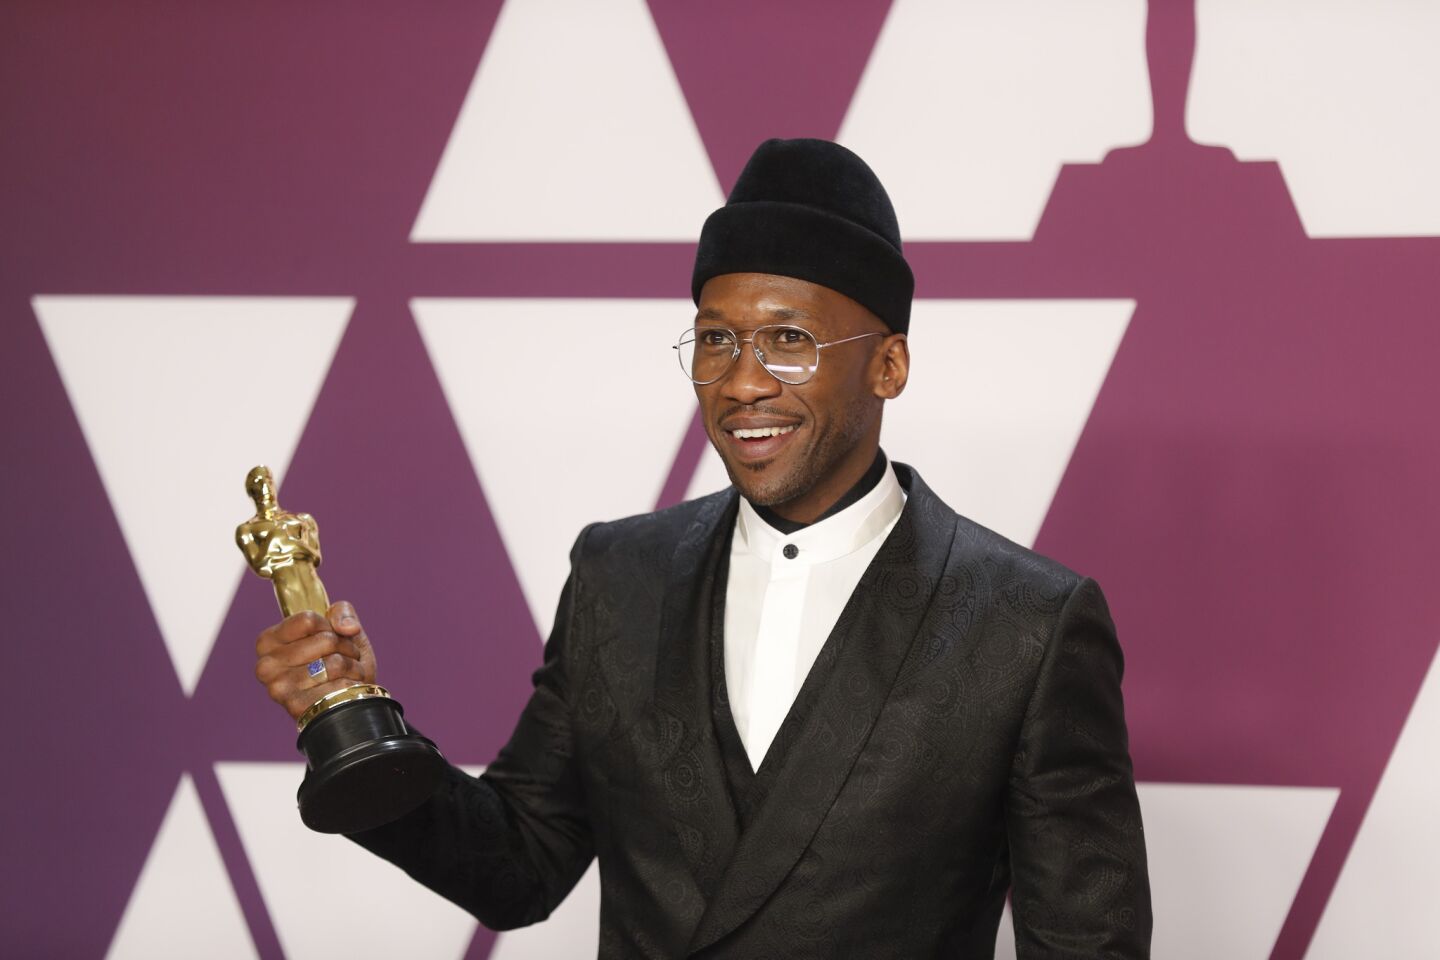 Mahershala Ali, winner of the supporting actor Oscar for "Green Book."